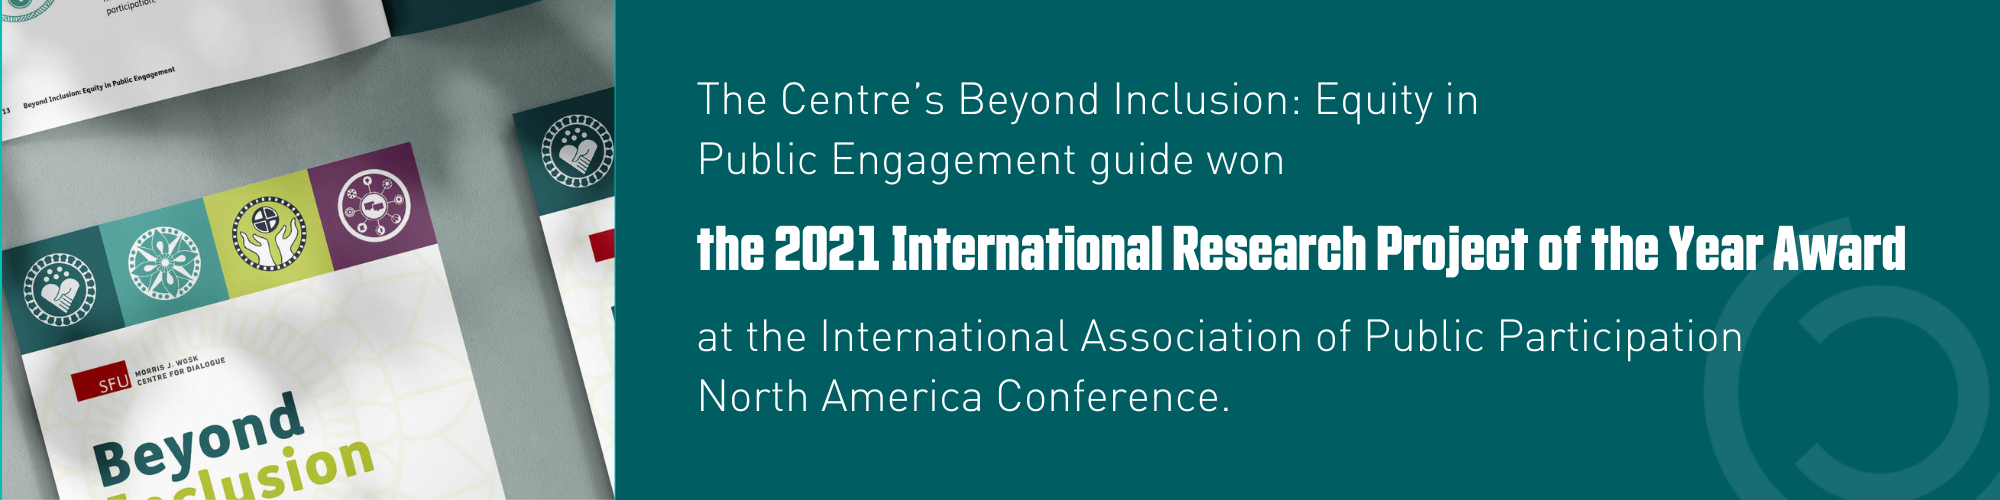 Text: The Centre's Beyond Inclusion: Equity in Public Engagement Guide won the 2021 International Research Project of the Year Award at the International Association of Public Participation North America conference